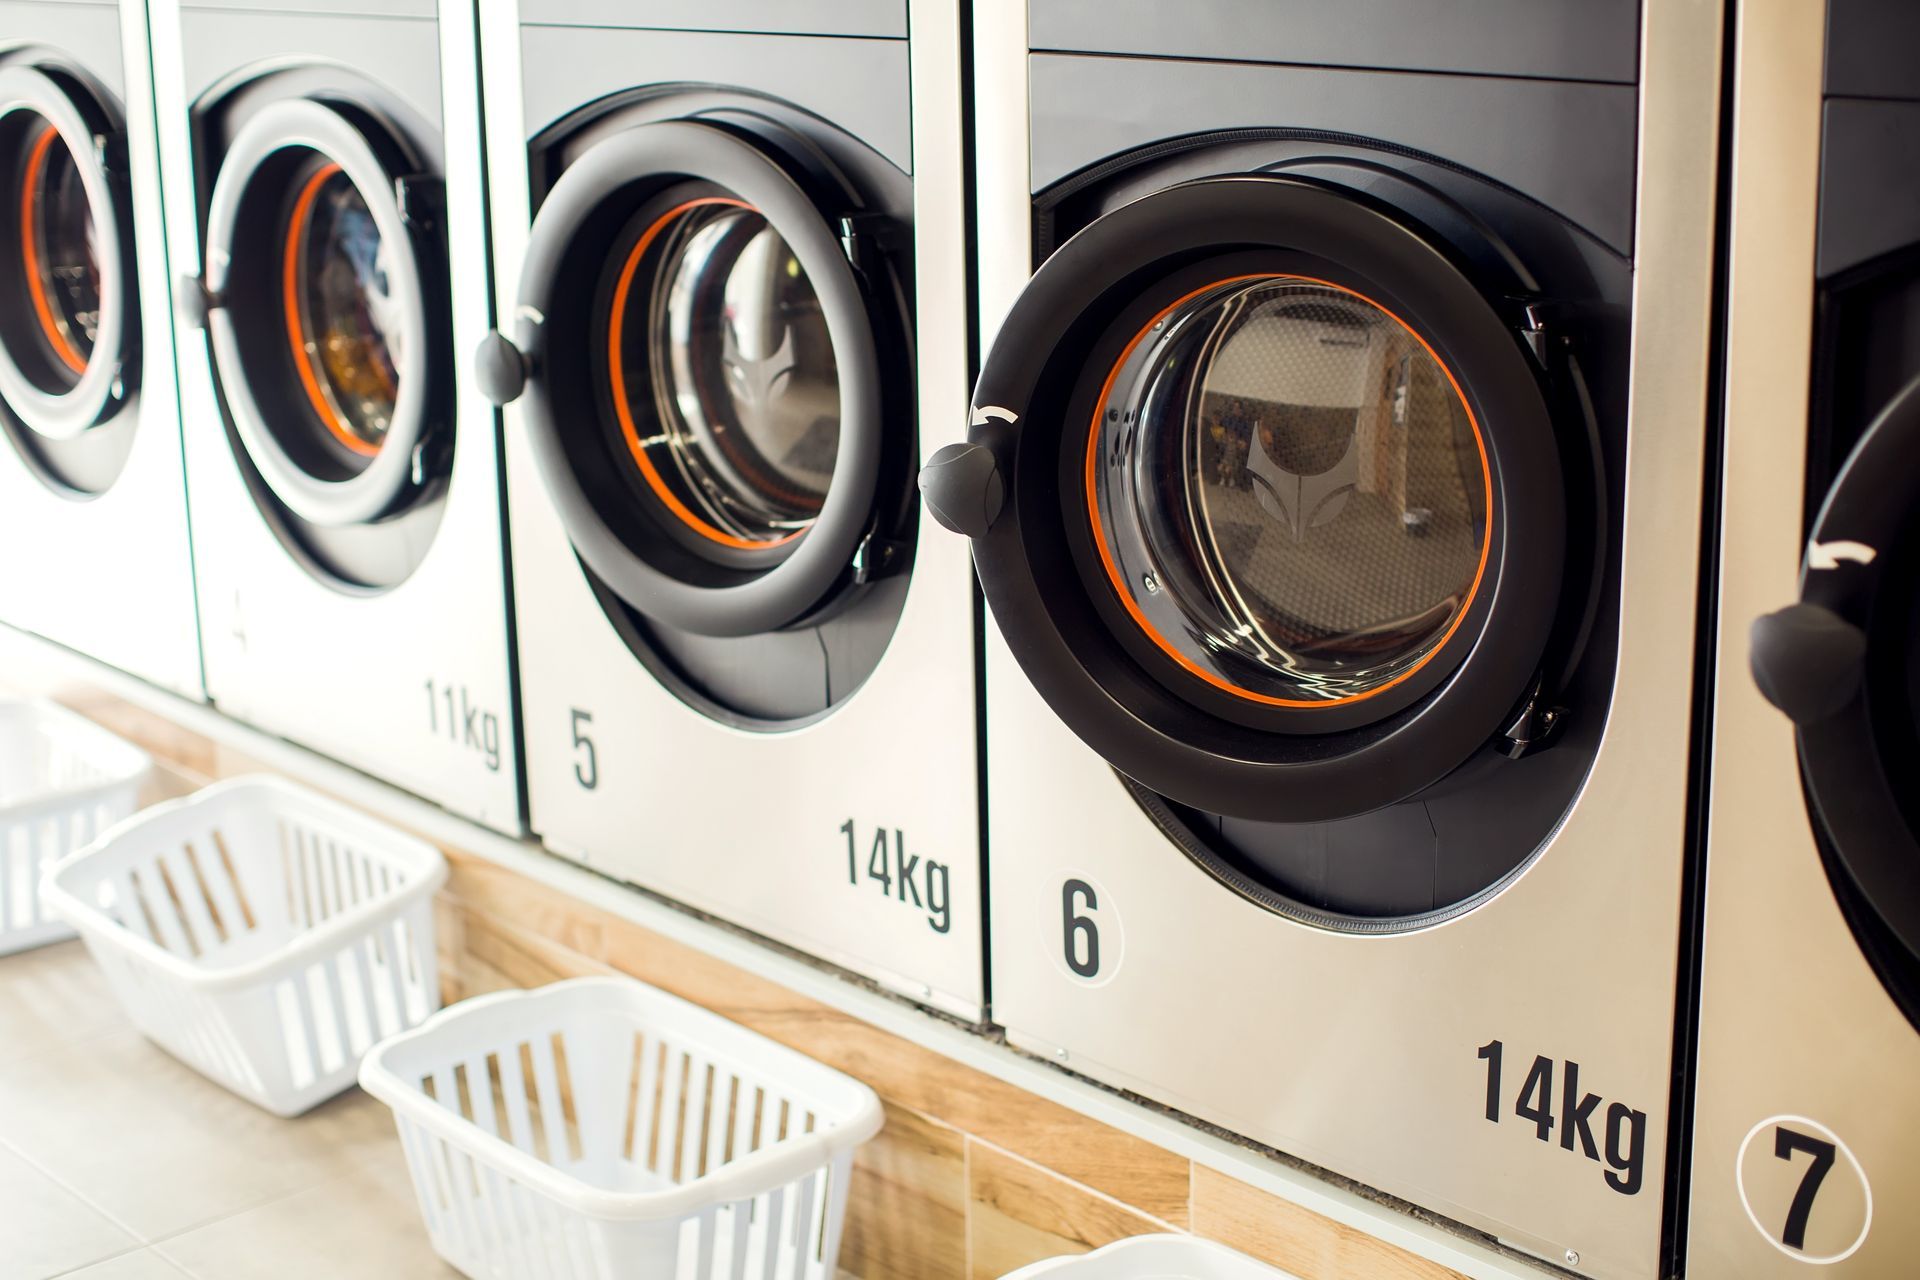 a row of washing machines in a laundromat with baskets .